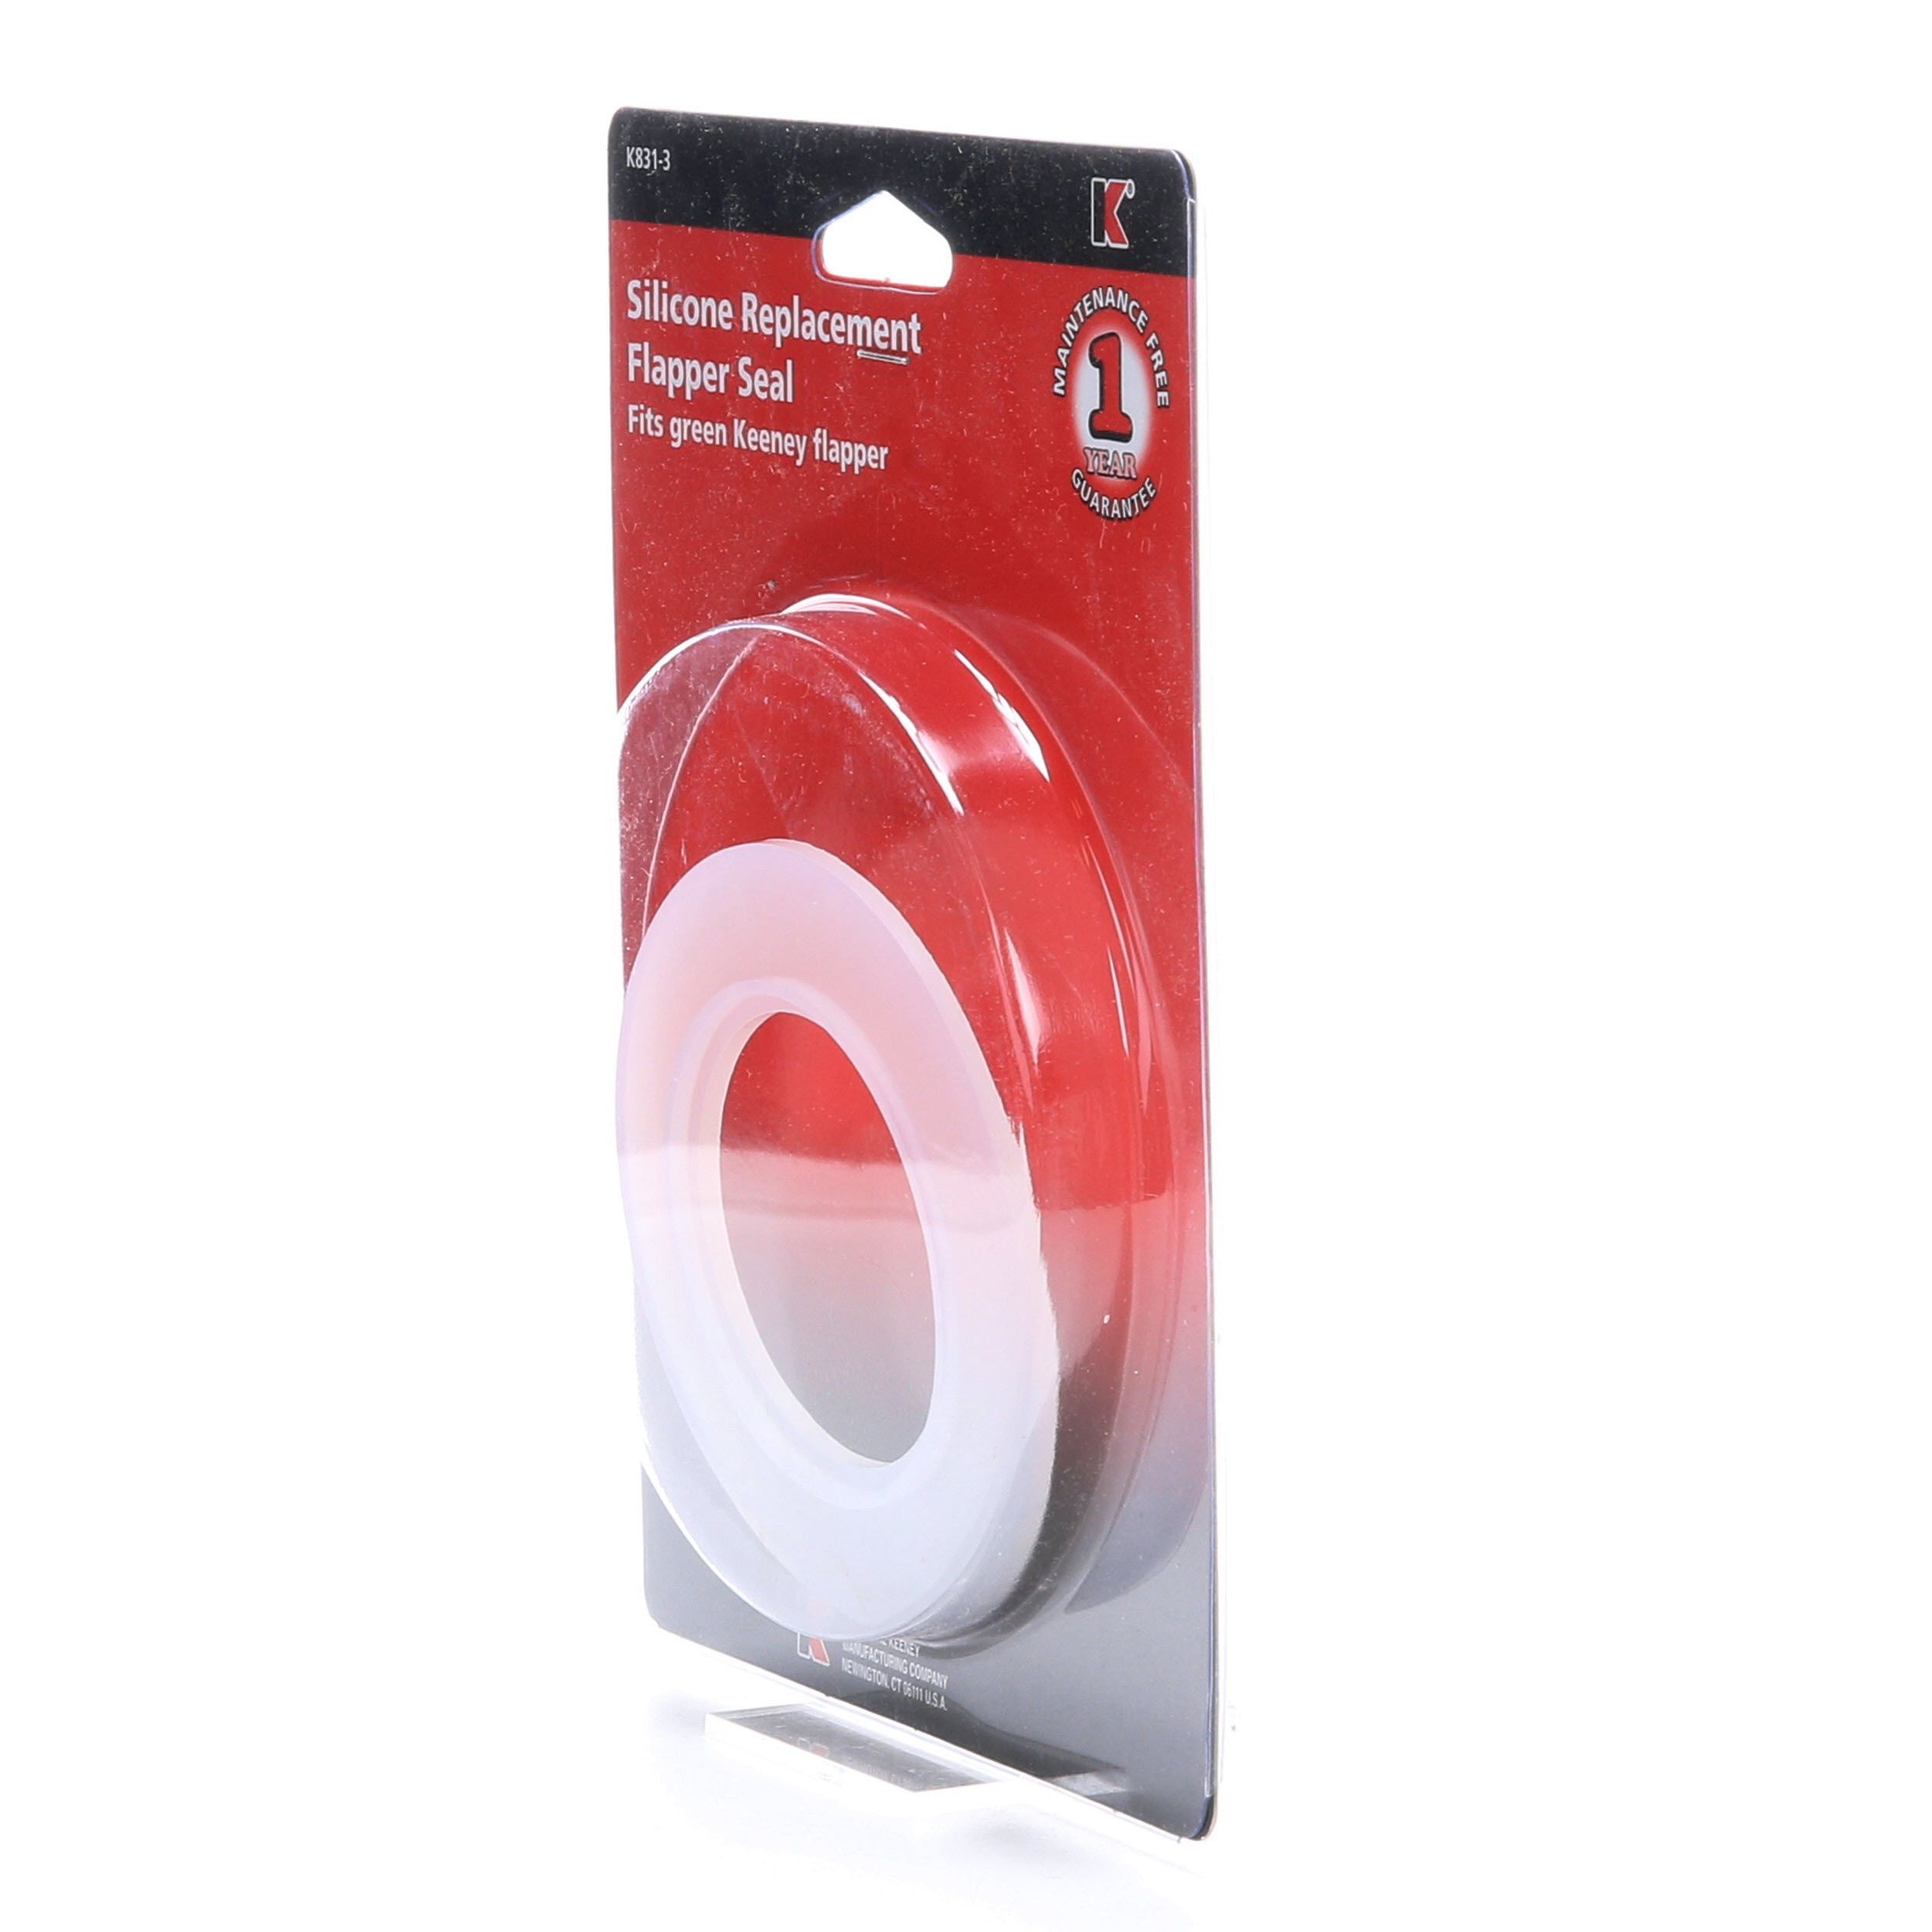 Keeney K831-3 3-Inch Replacement Silicone Flapper Seal Clear